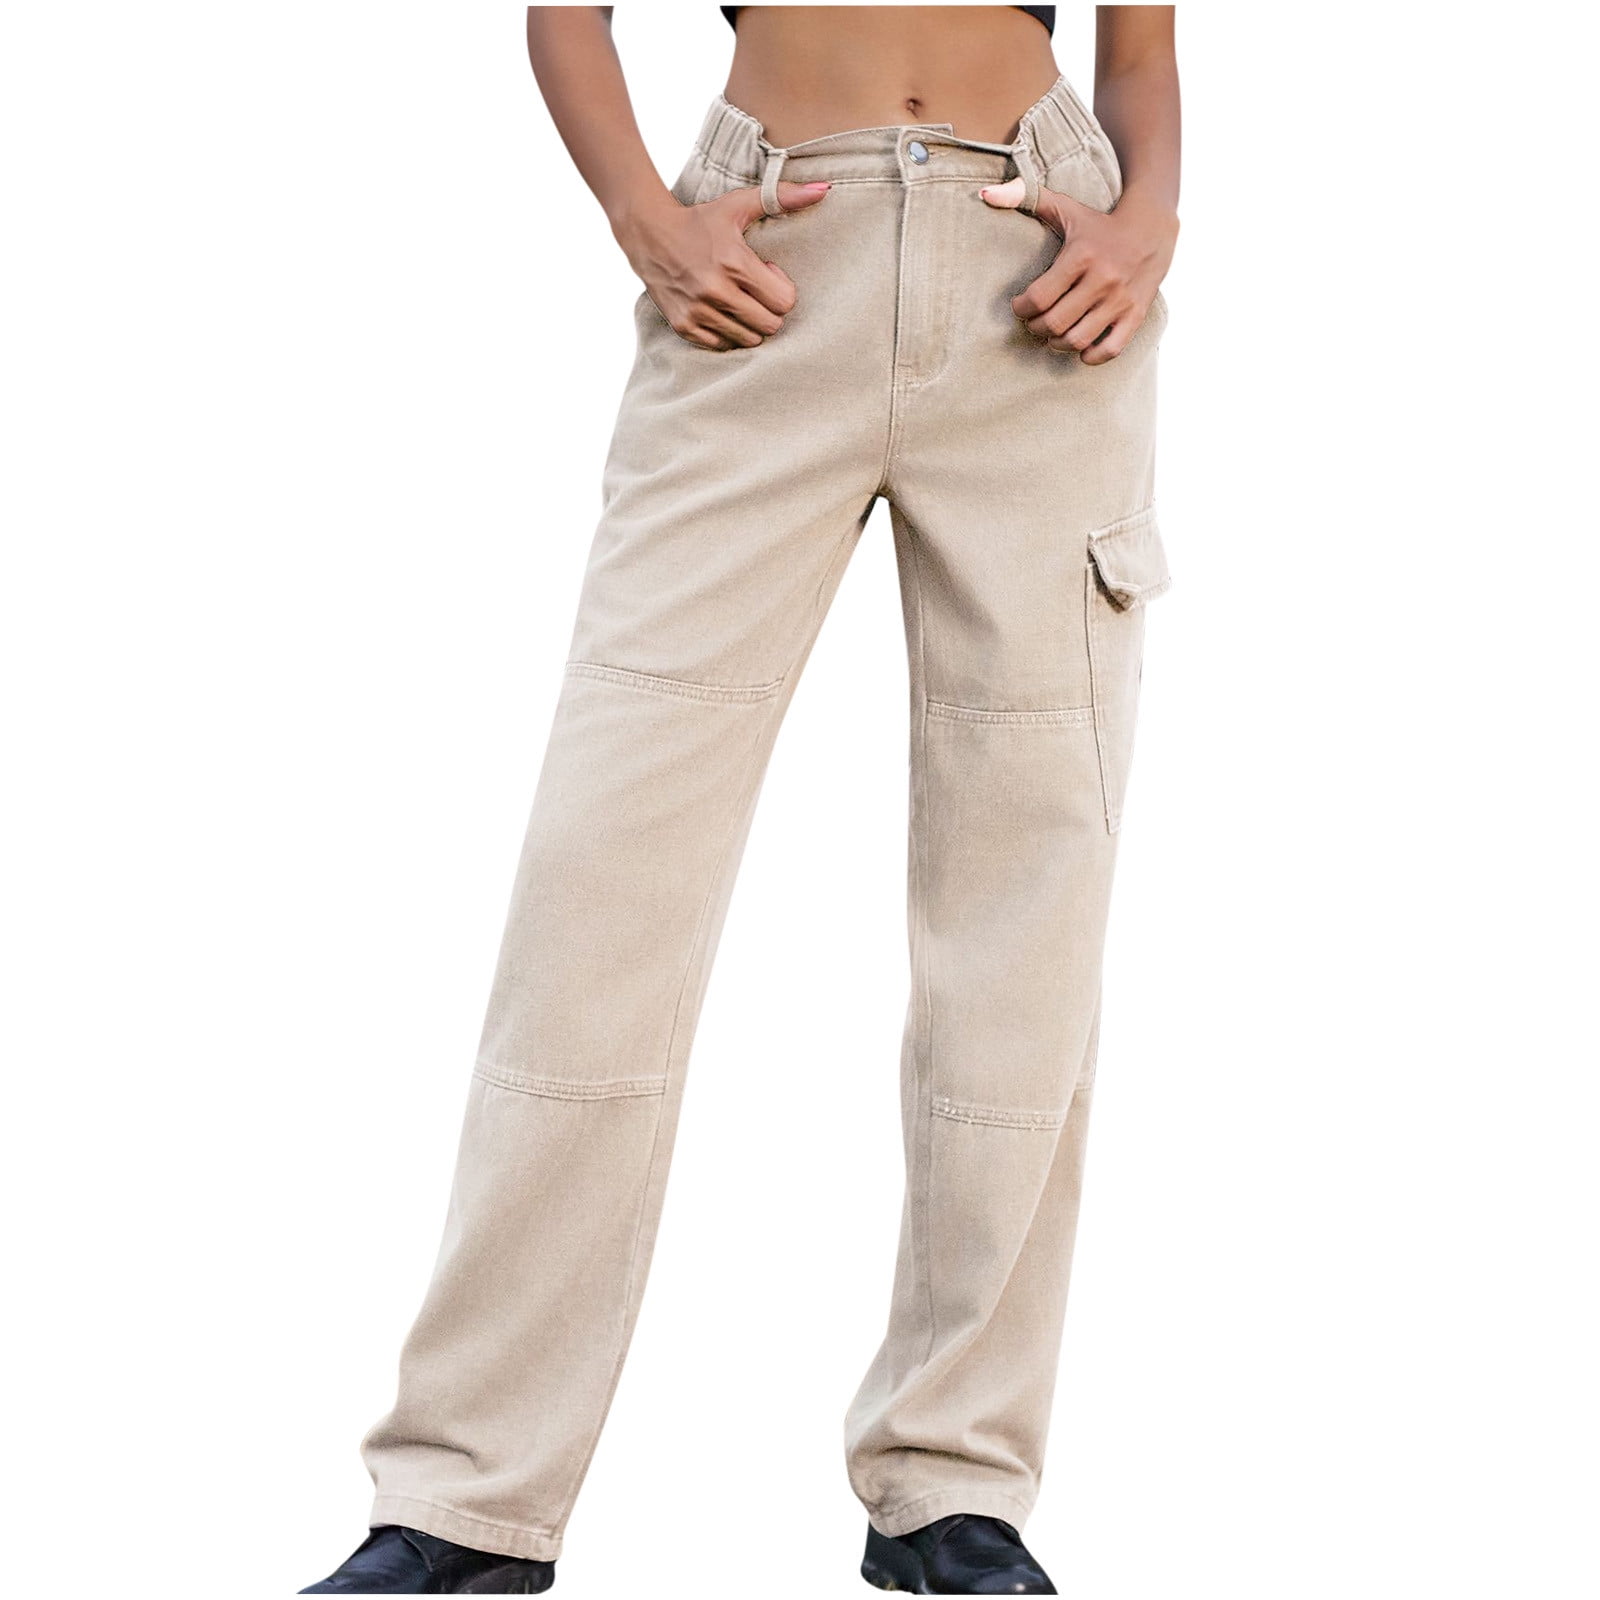 Cargo pants for women with pockets clearance Fashion Women's Spring/Summer  Pocket Button Mid Waist Tight Pants Work pants Khaki XL 